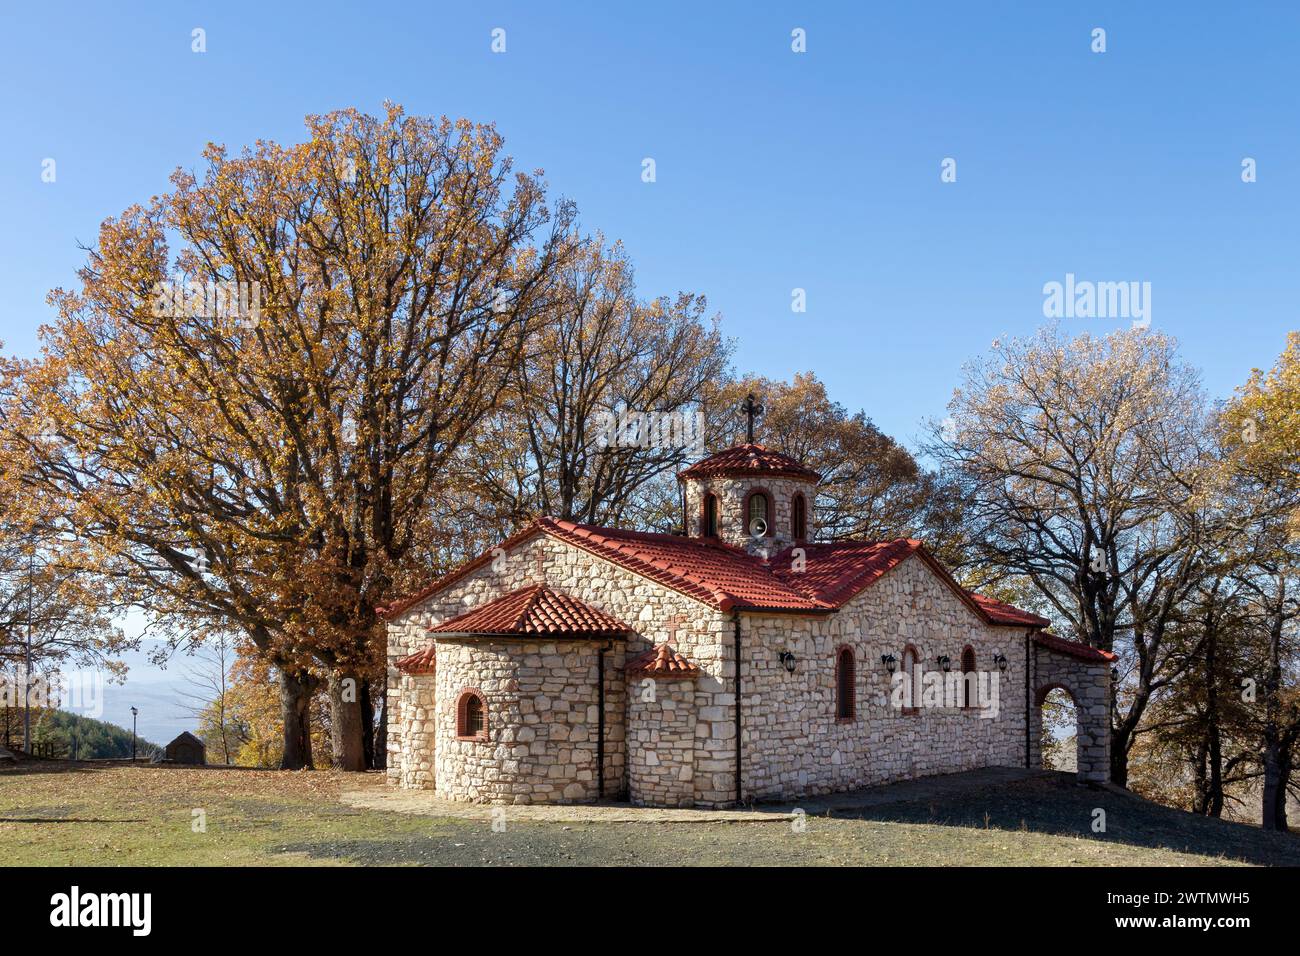 Small stone-built christian church with tile roof in the plains of Kozani, in Macedonia region, in Greece, Europe. Stock Photo